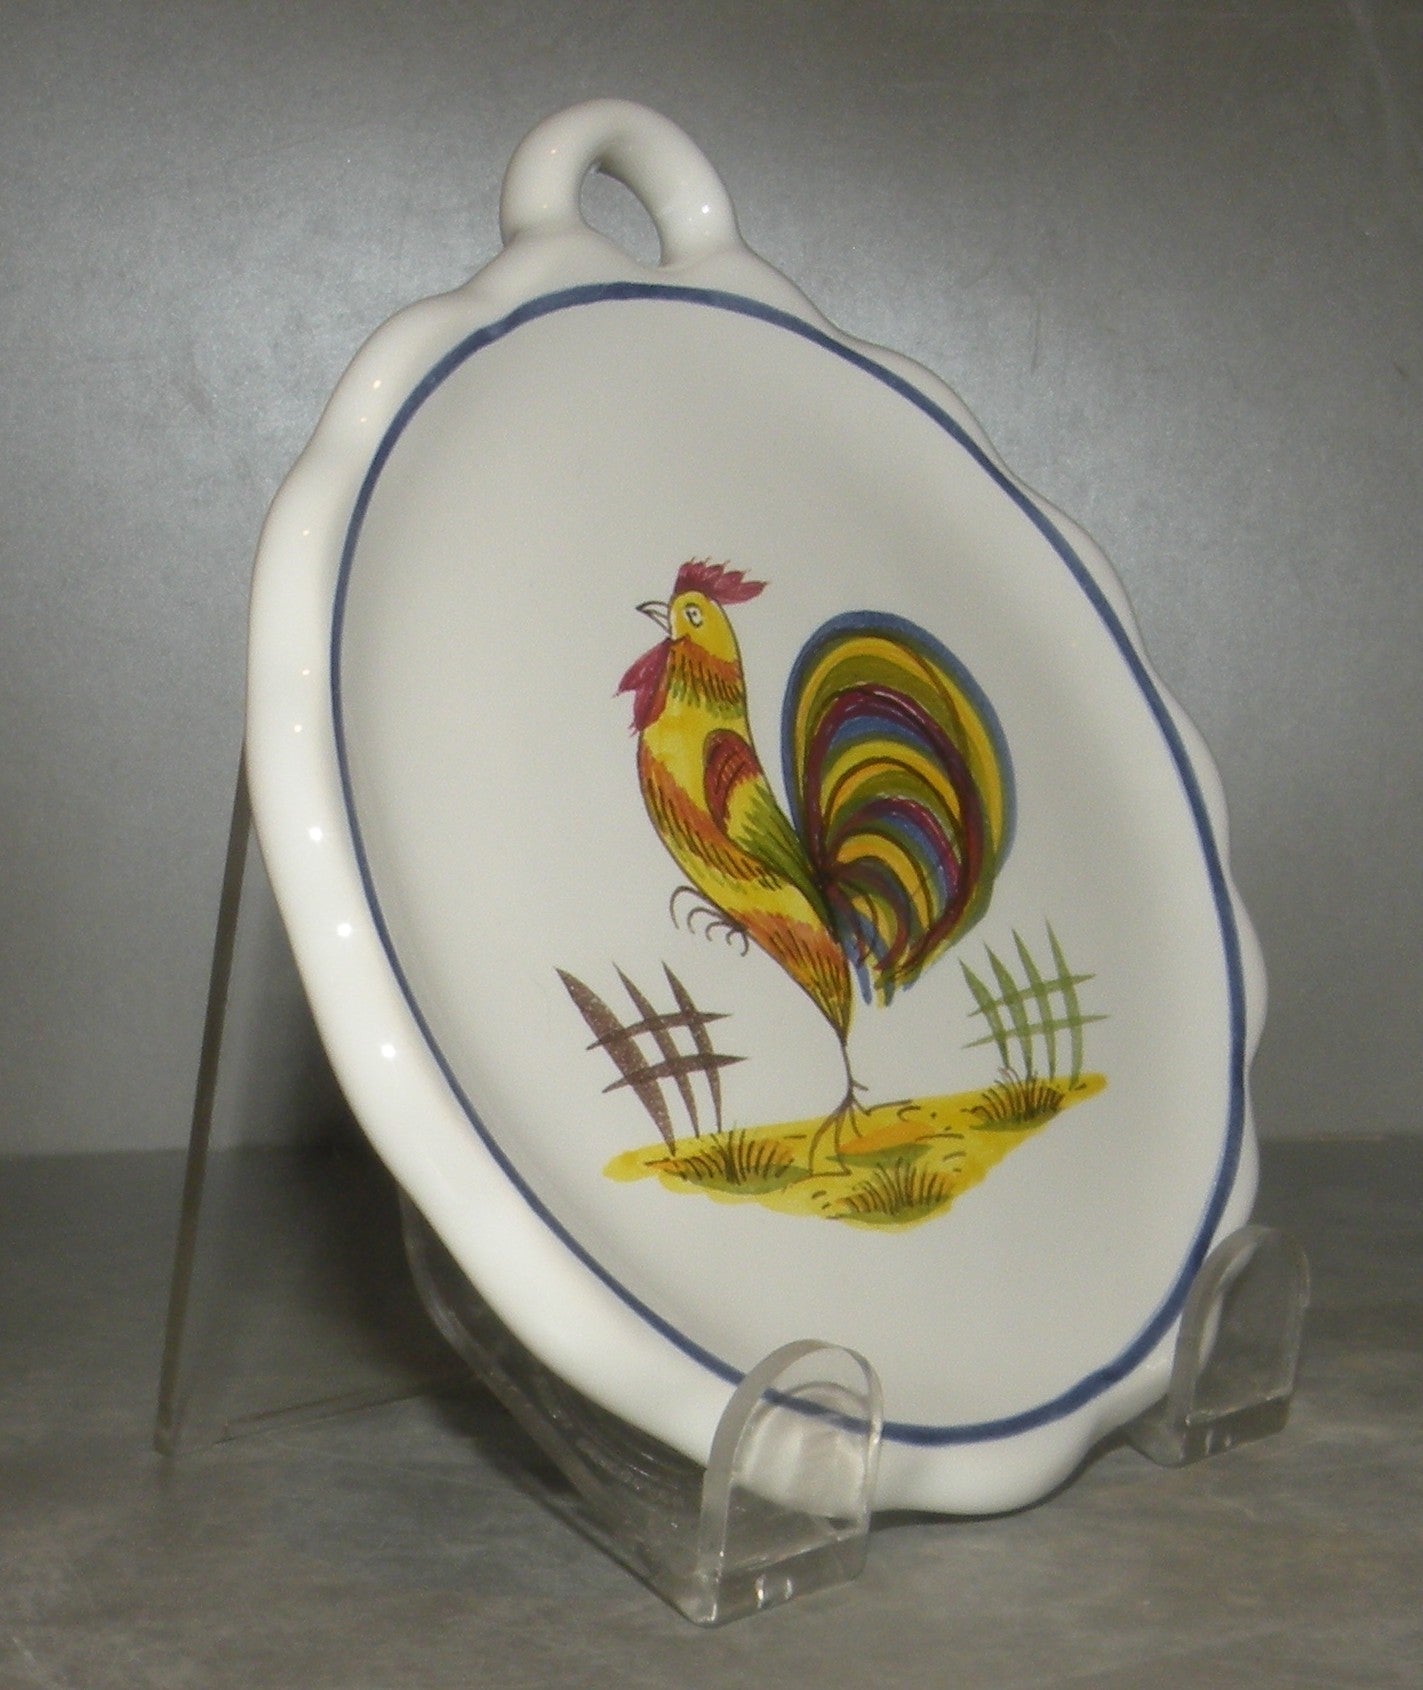 Dish with handle, Coq Francais